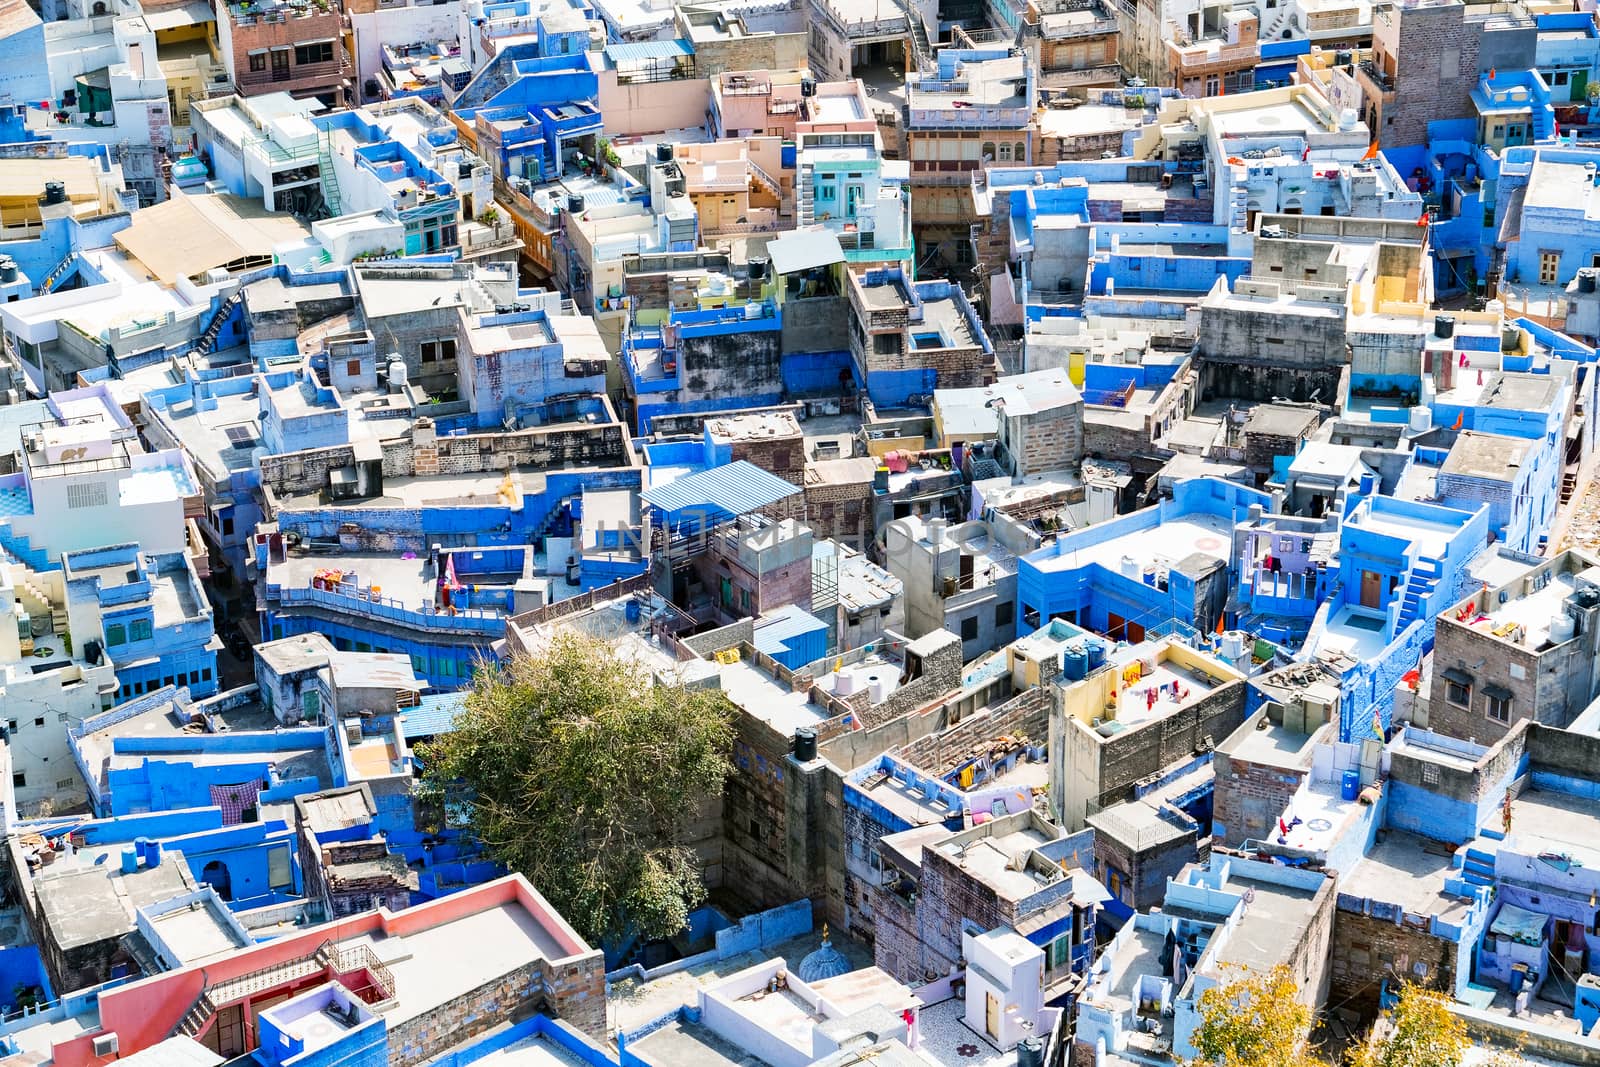 Aerial view of Jodhpur city, Rajasthan, India. The famous blue city, seen from Mehrangarh fort.